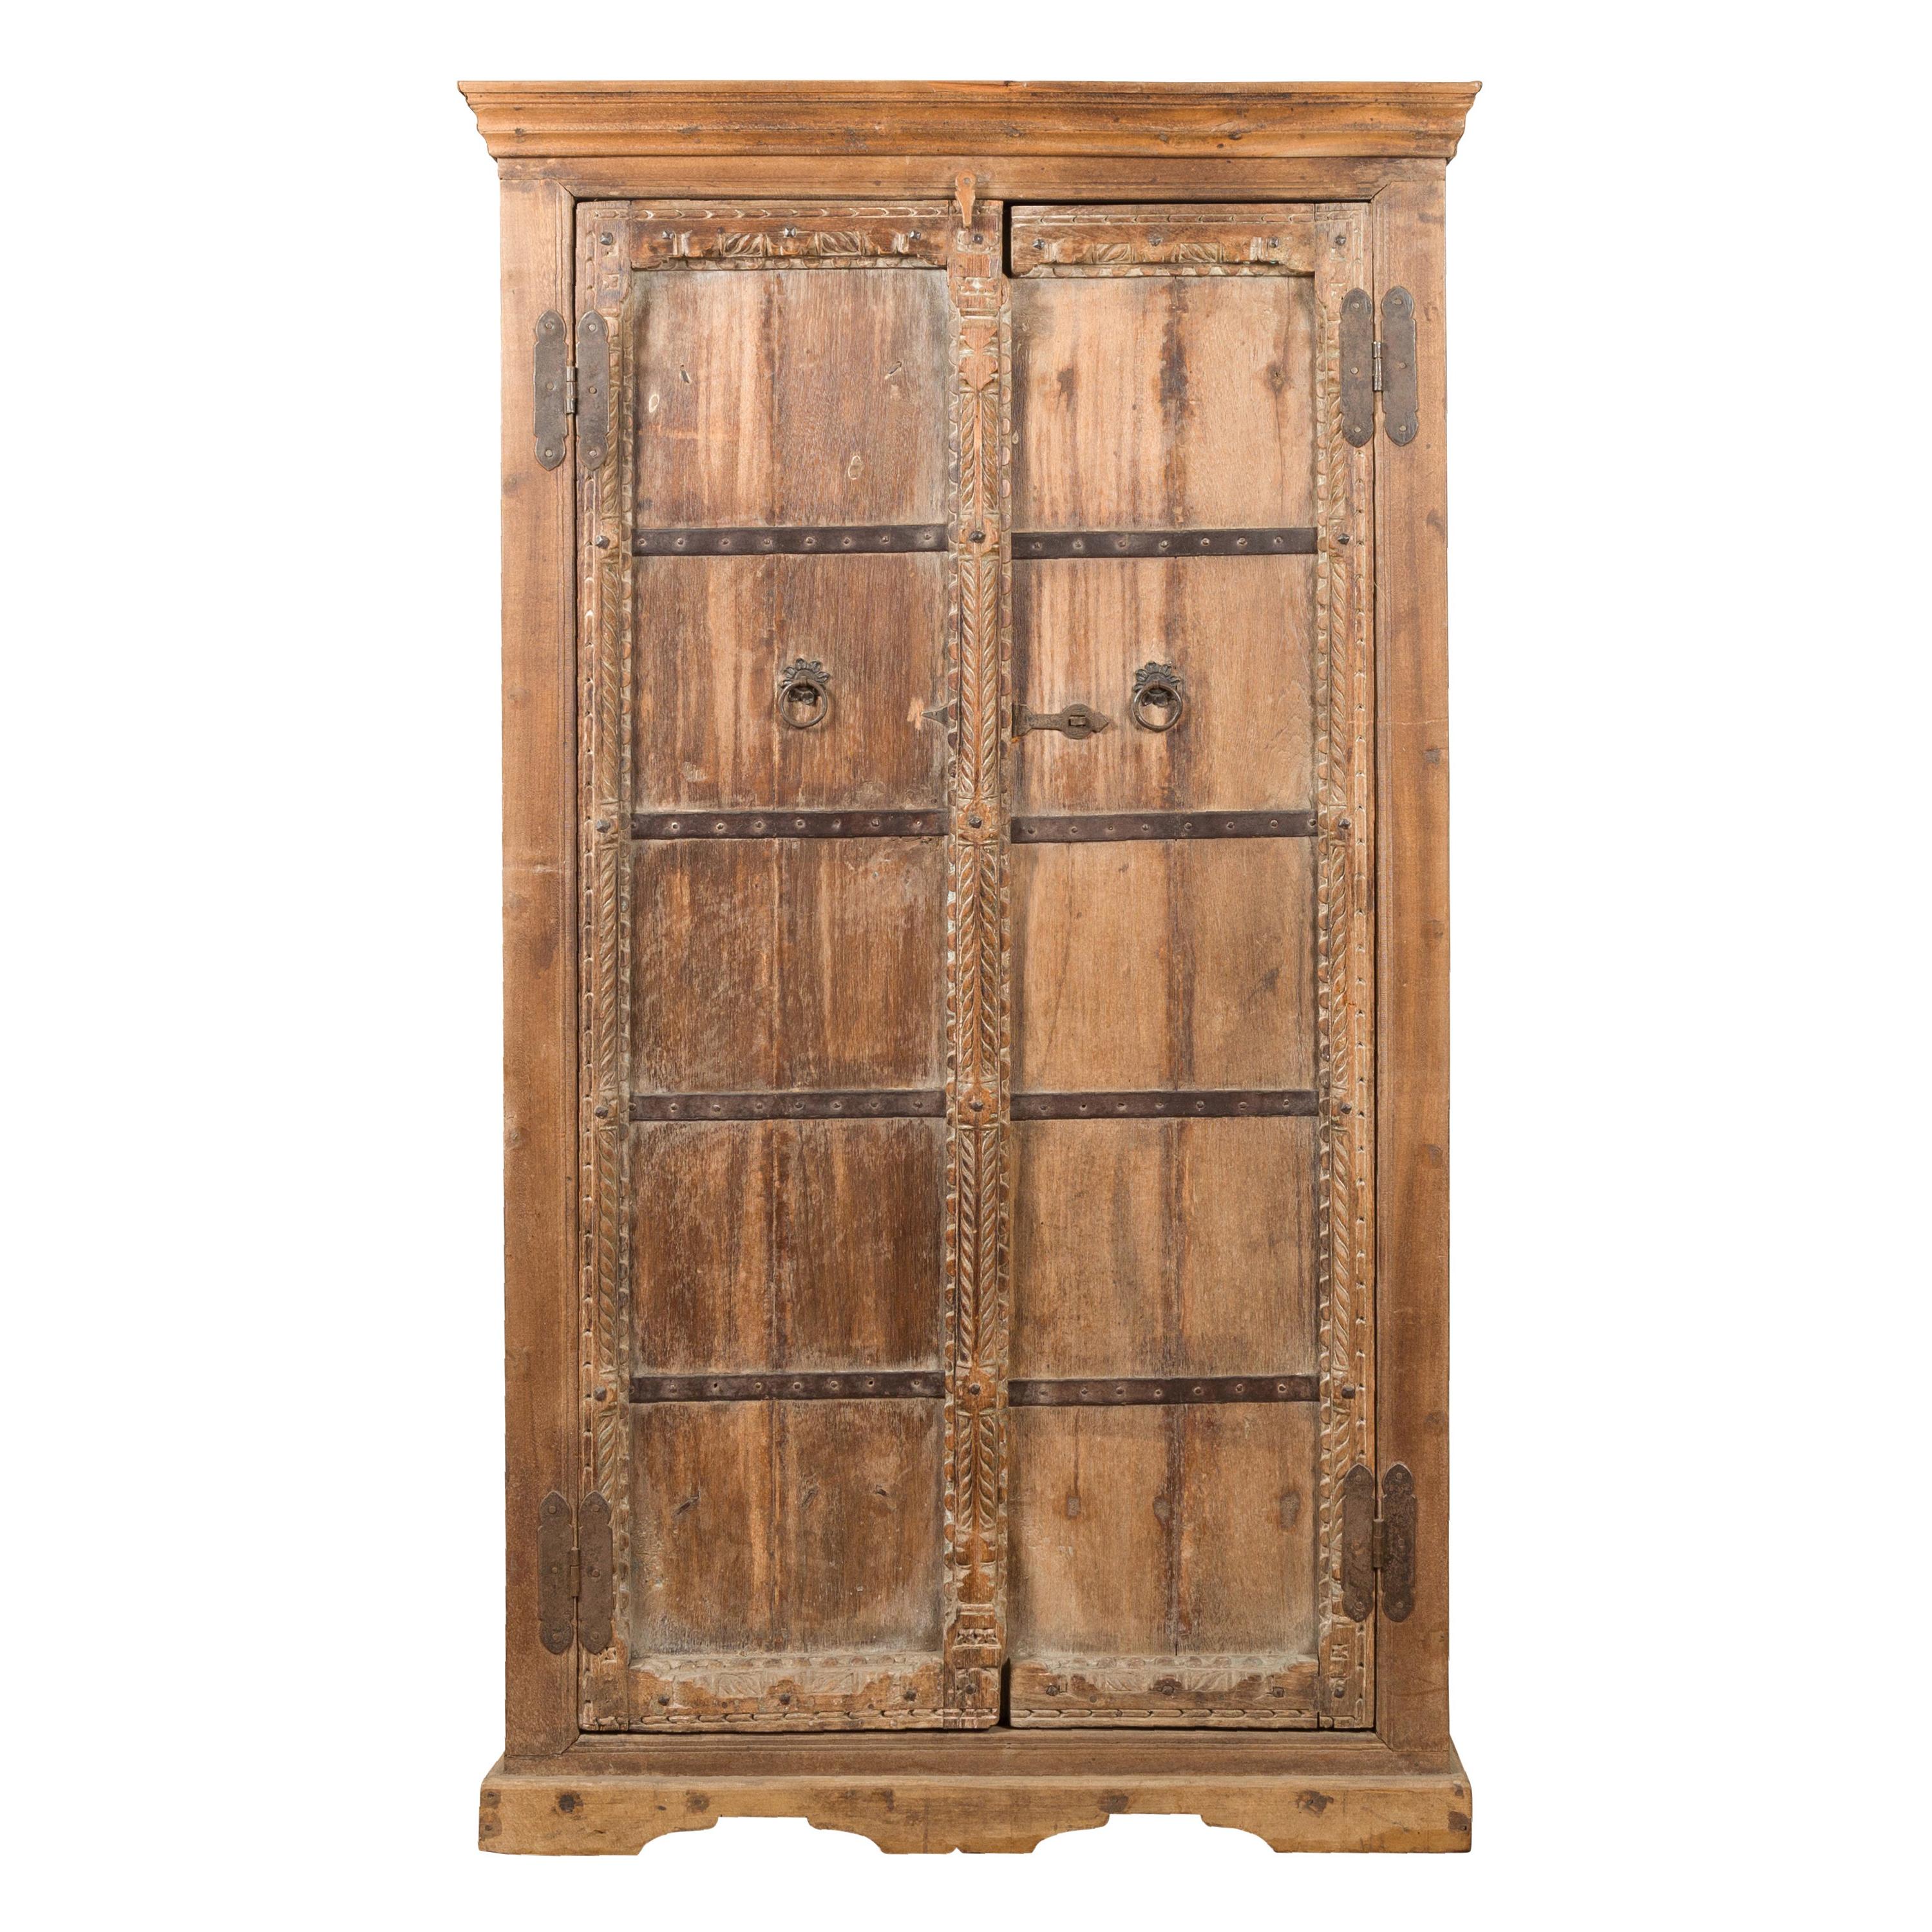 Indian 19th Century Sheesham Gujarat Cabinet with Carved Doors and Iron Accents